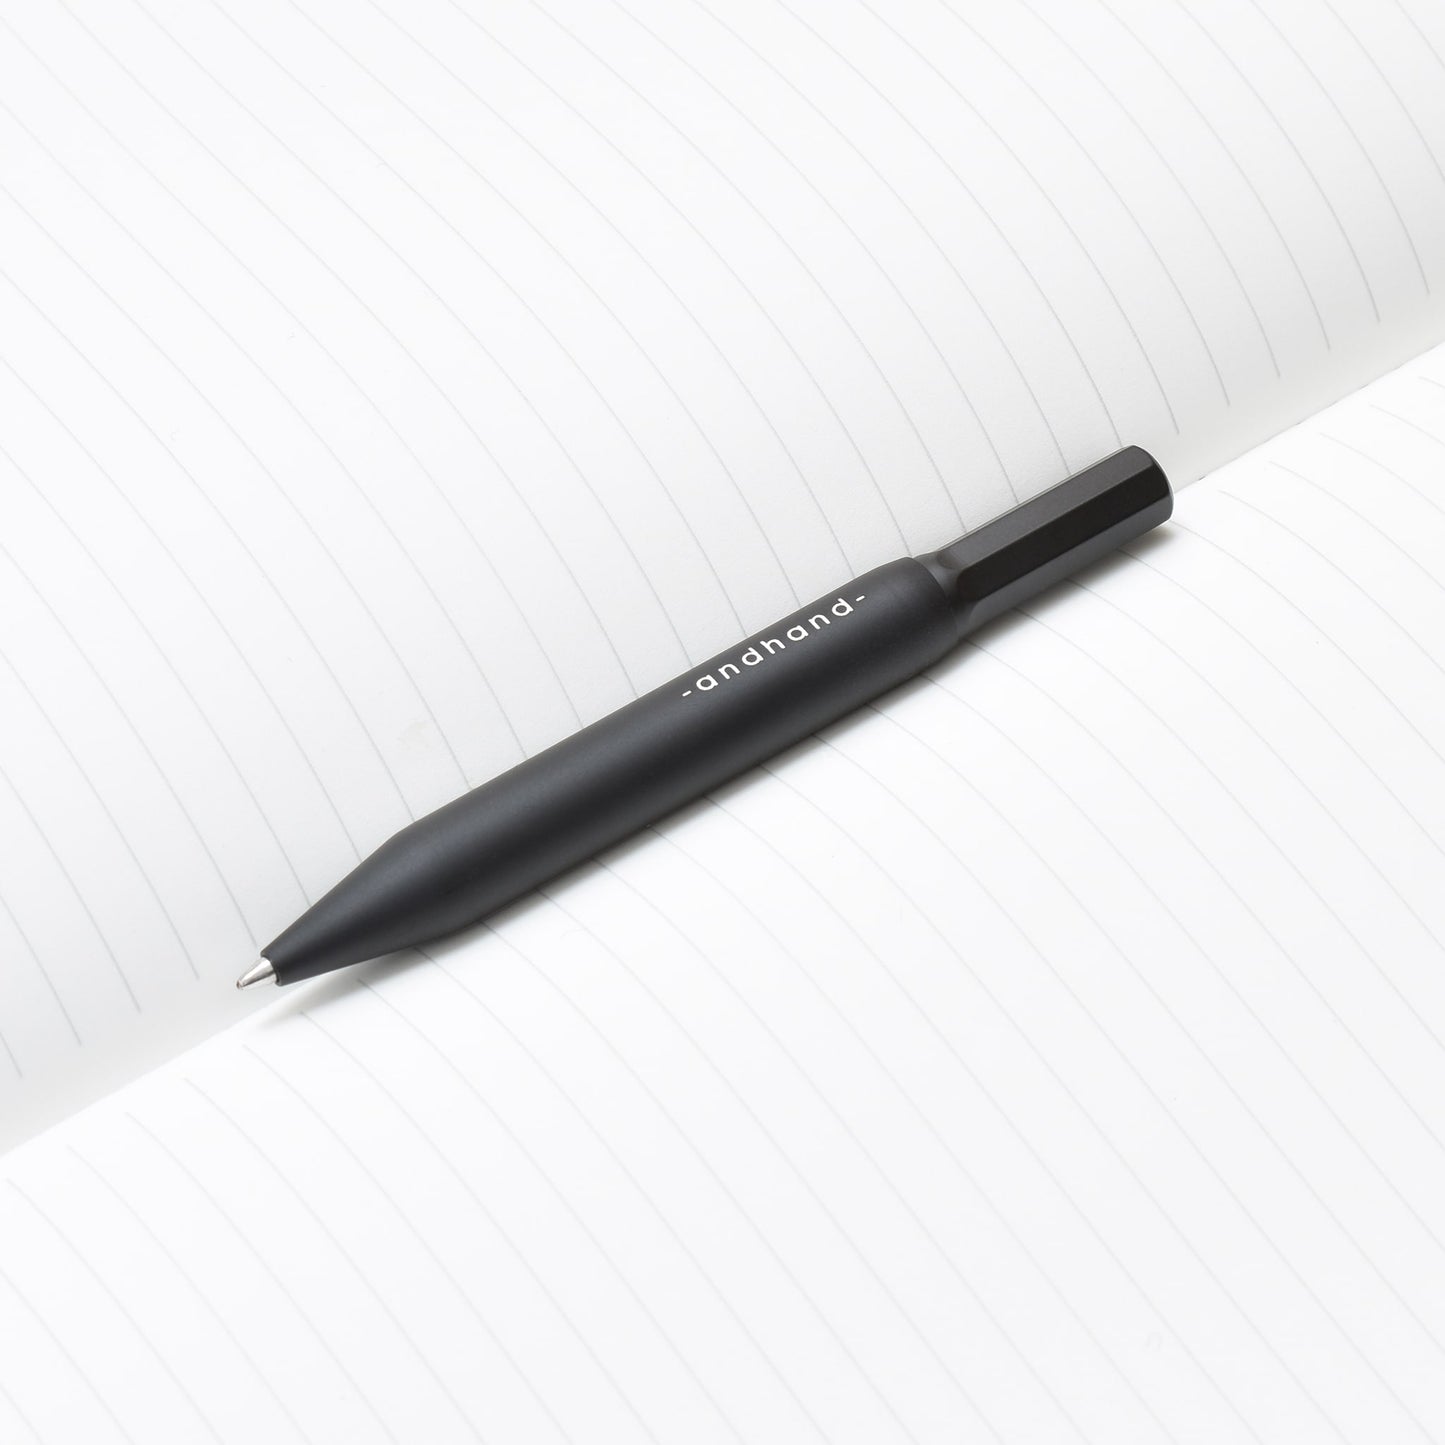 4 inch pen. Aluminium and brass everyday carry black pen from Andhand. An expert compact writing tool with a smooth mechanism and modern minimal design. Amazingly durable and refined. Shown here in black satin anodized finish.